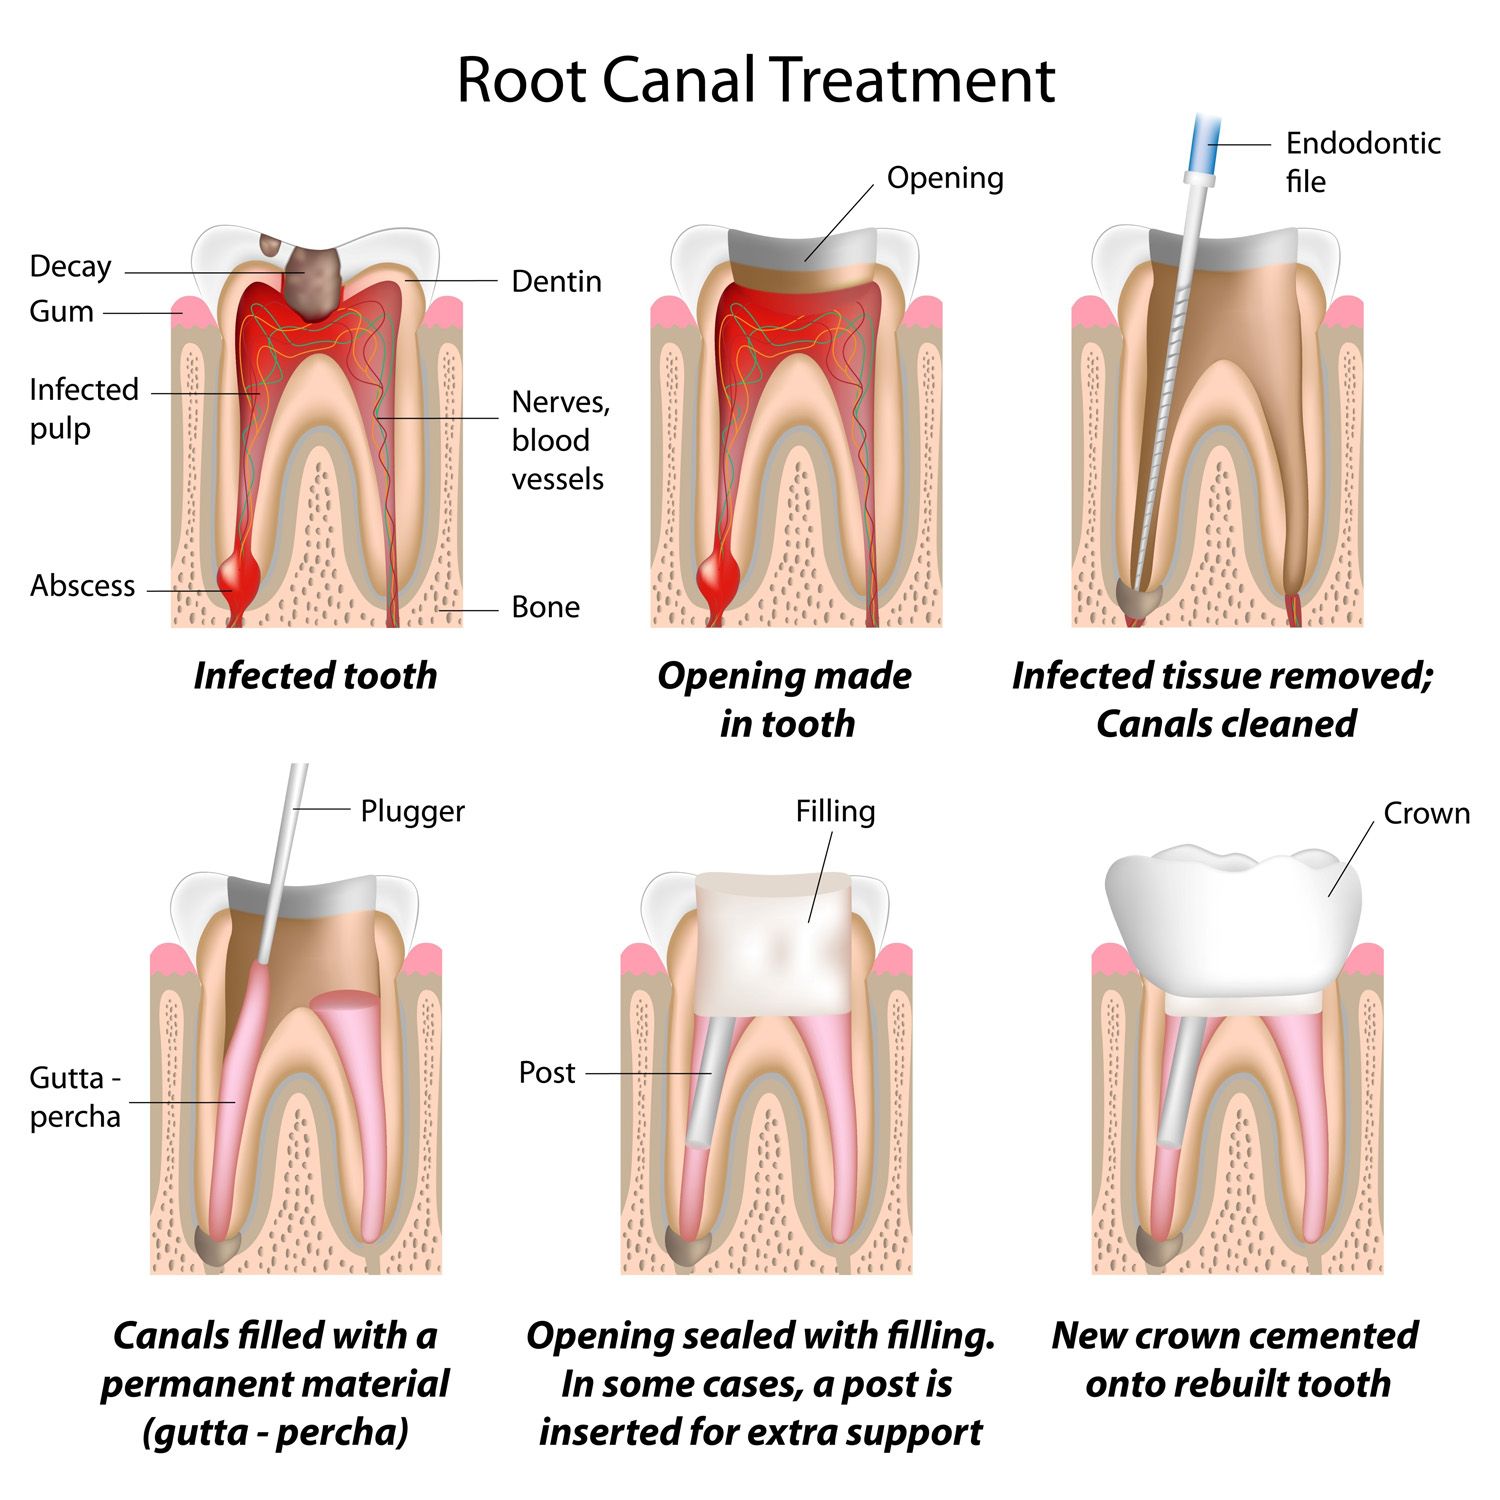 Root Canal Therapy - Illustration